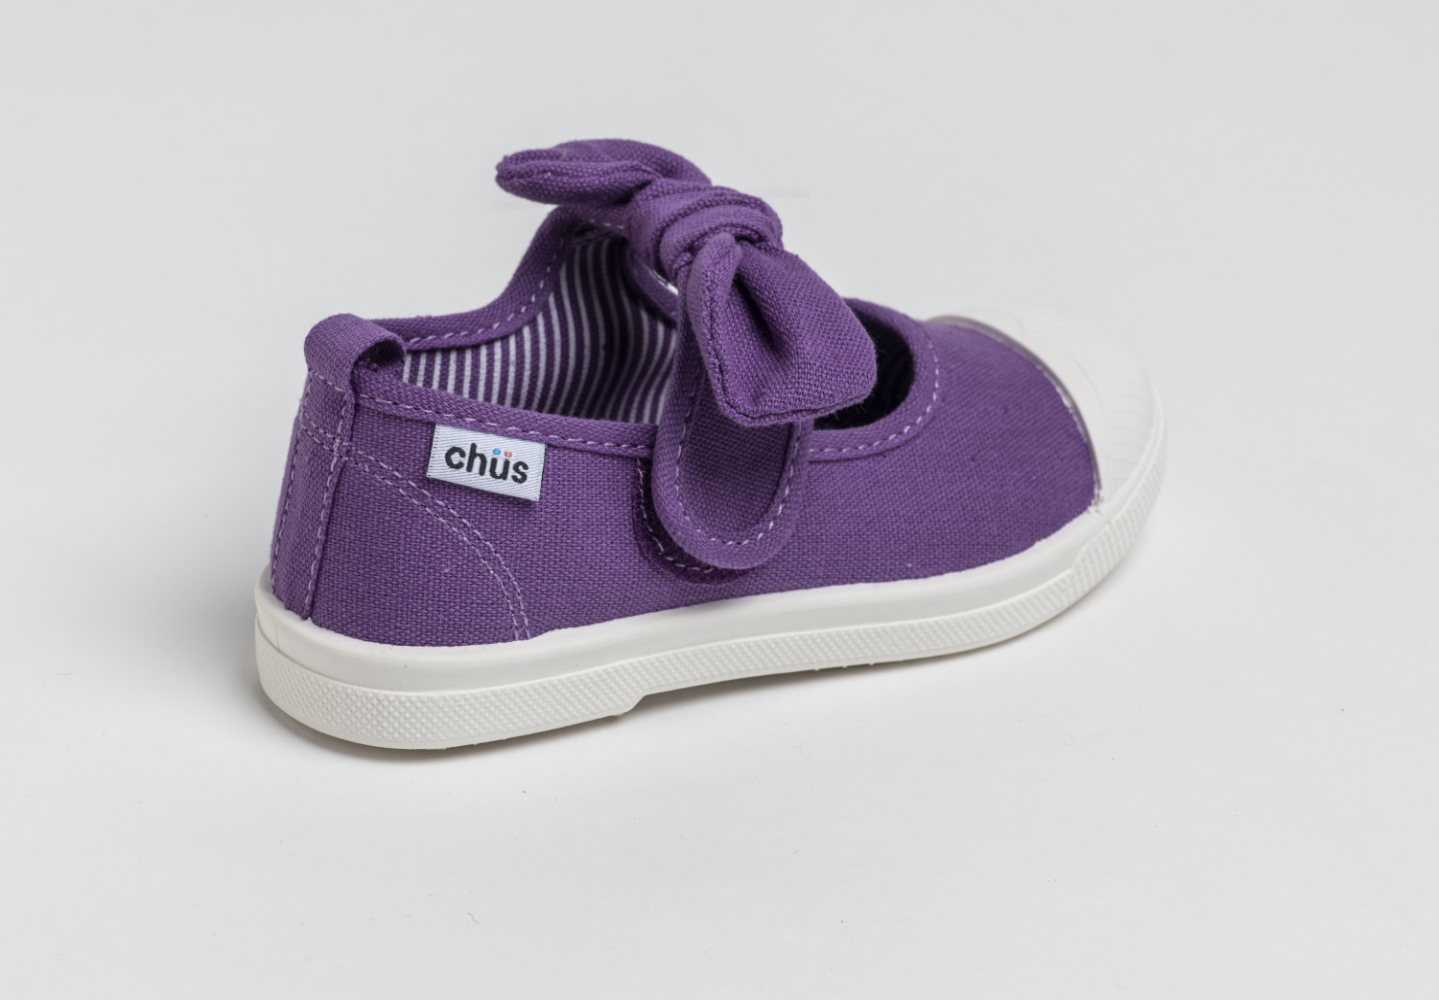 Canvas sneakers with single velcro strap and removable bow tie in purple. Adorable monogrammed. Chus Shoes. Back view.